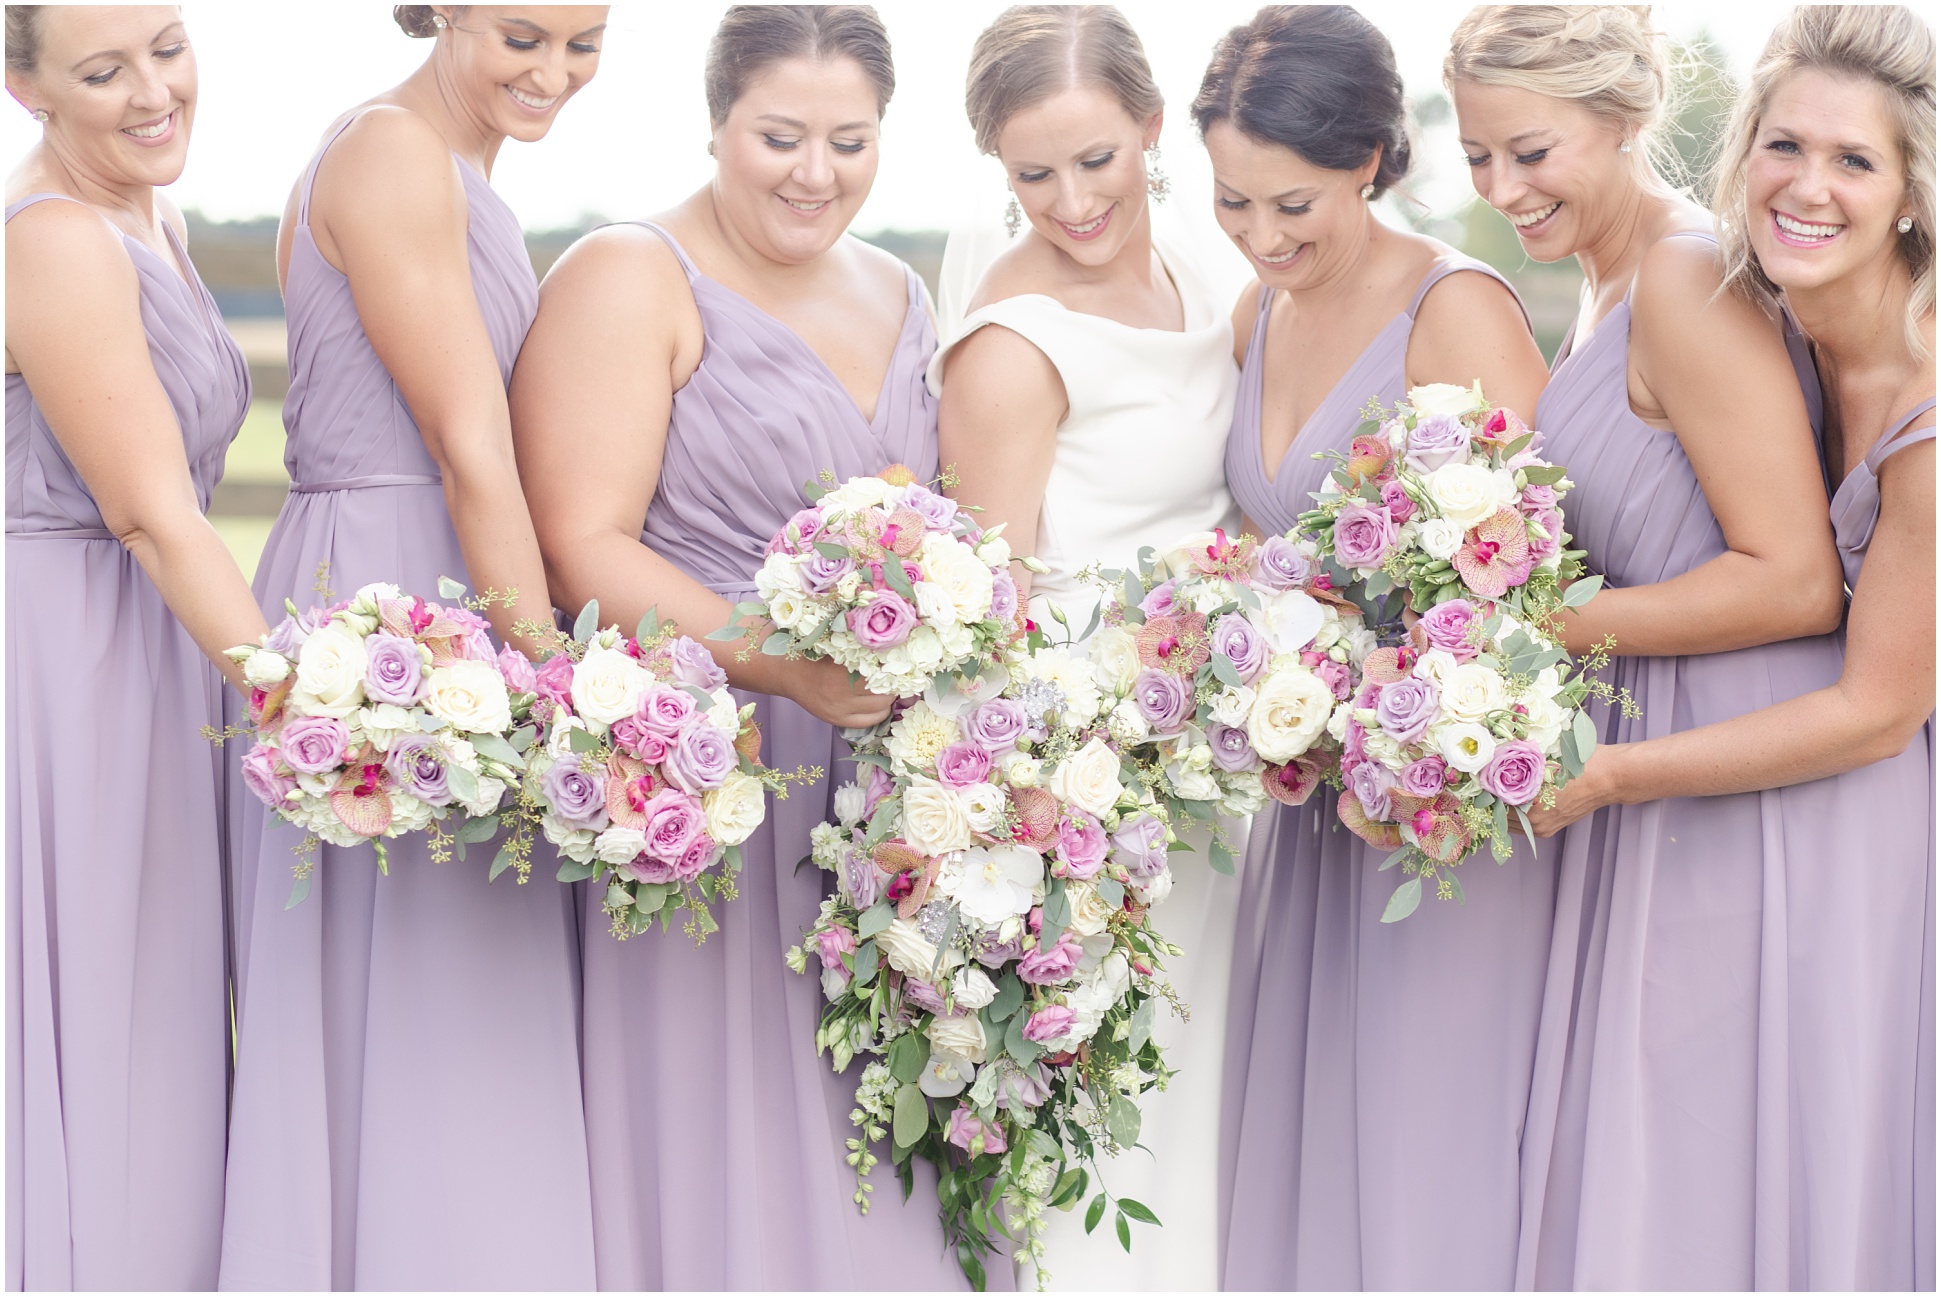 Bride with bridal party holding bouquets and looking down